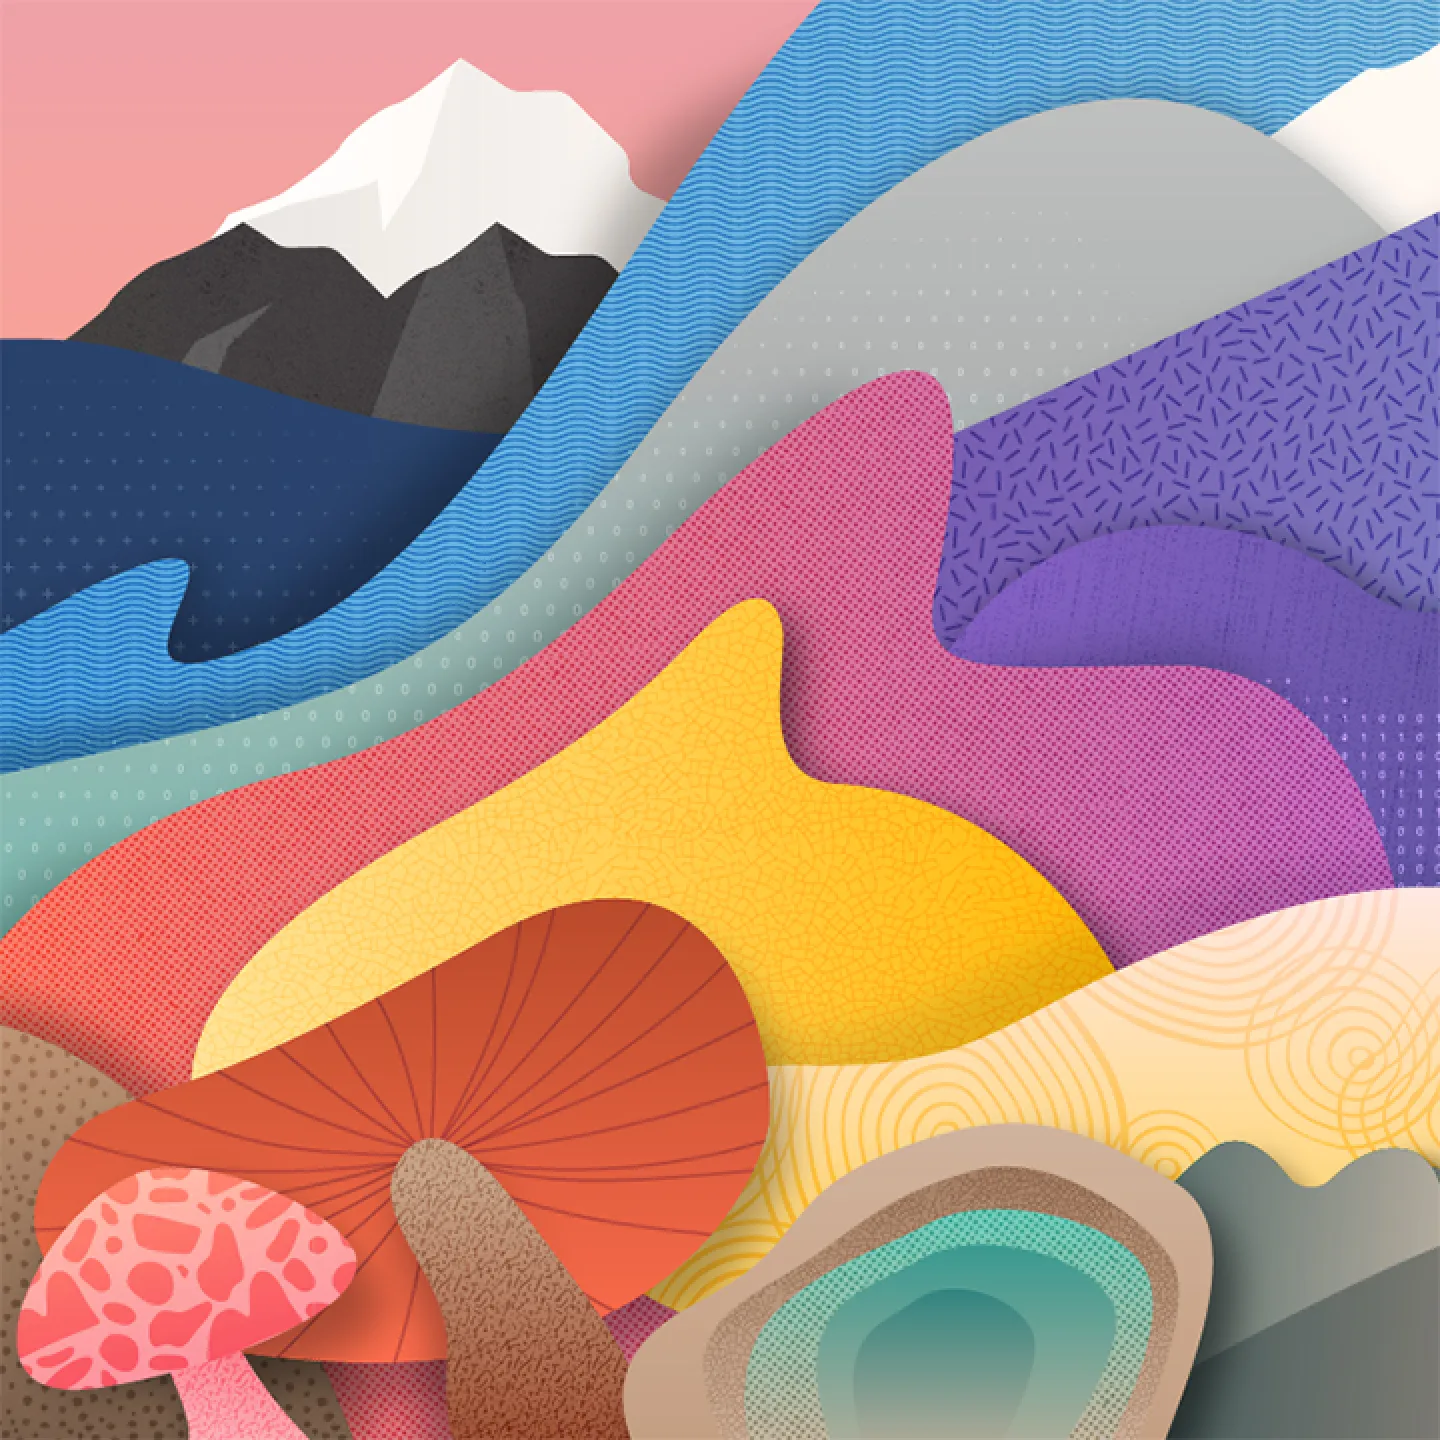 A colorful illustration of mountains and mushrooms.